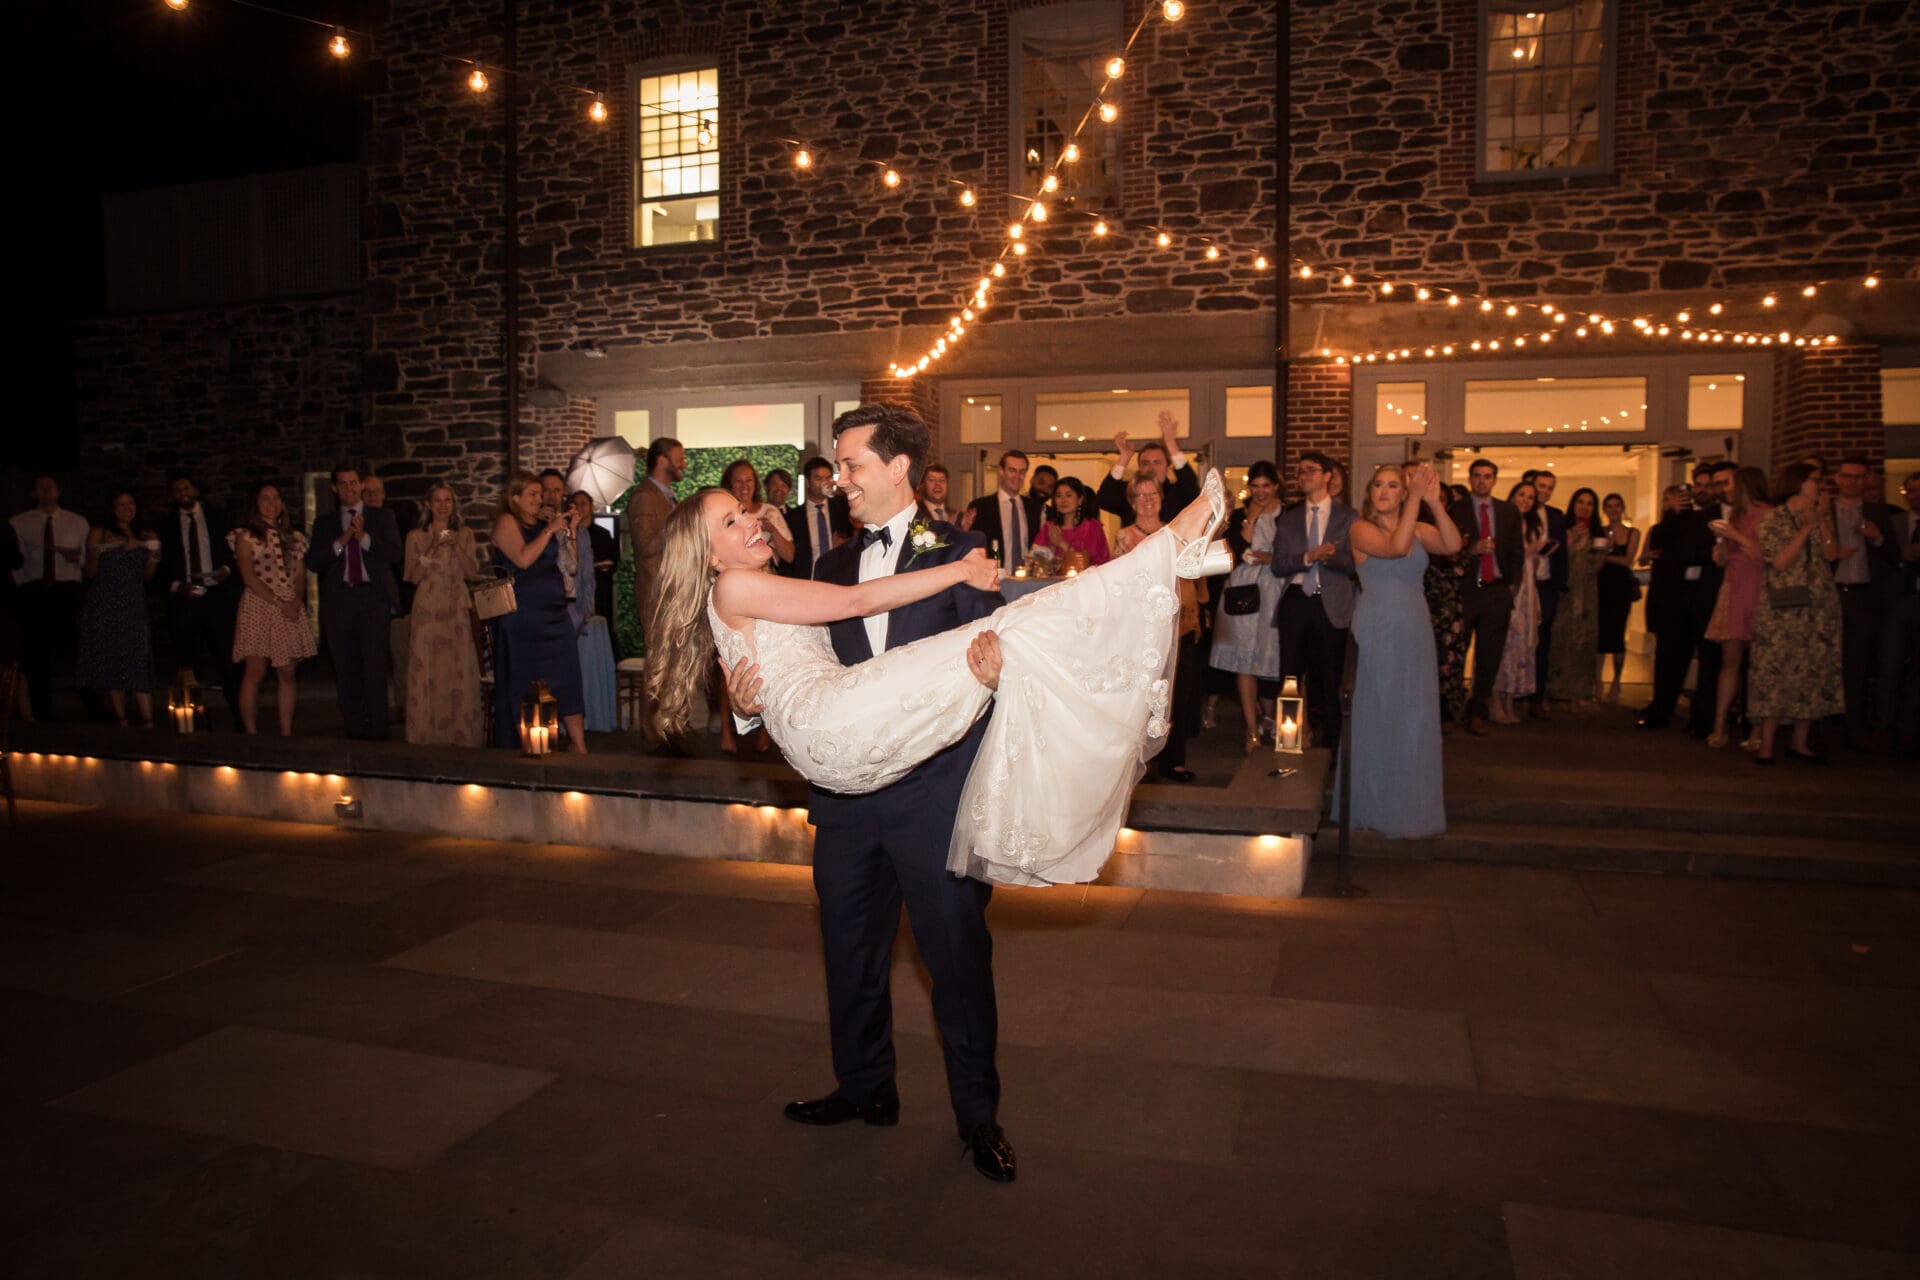 A groom is twirling his bride around the dance floor during their NYBG Stone Mill wedding